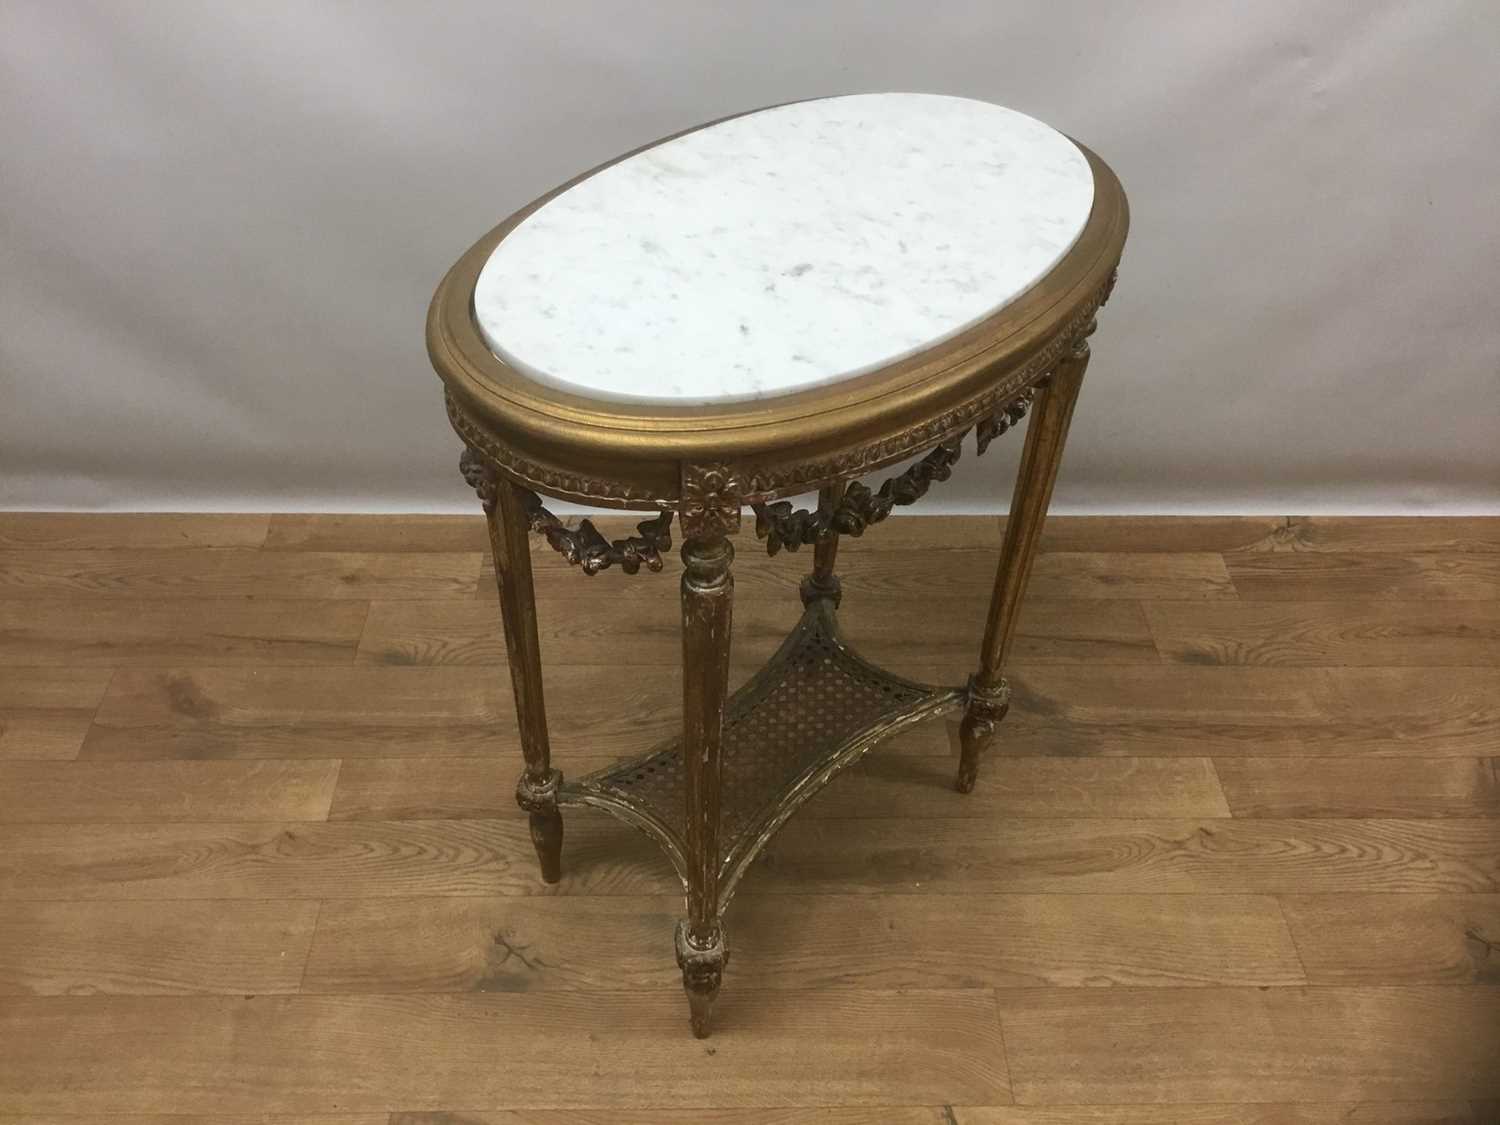 19th century French marble topped gilt wood table - Image 6 of 6